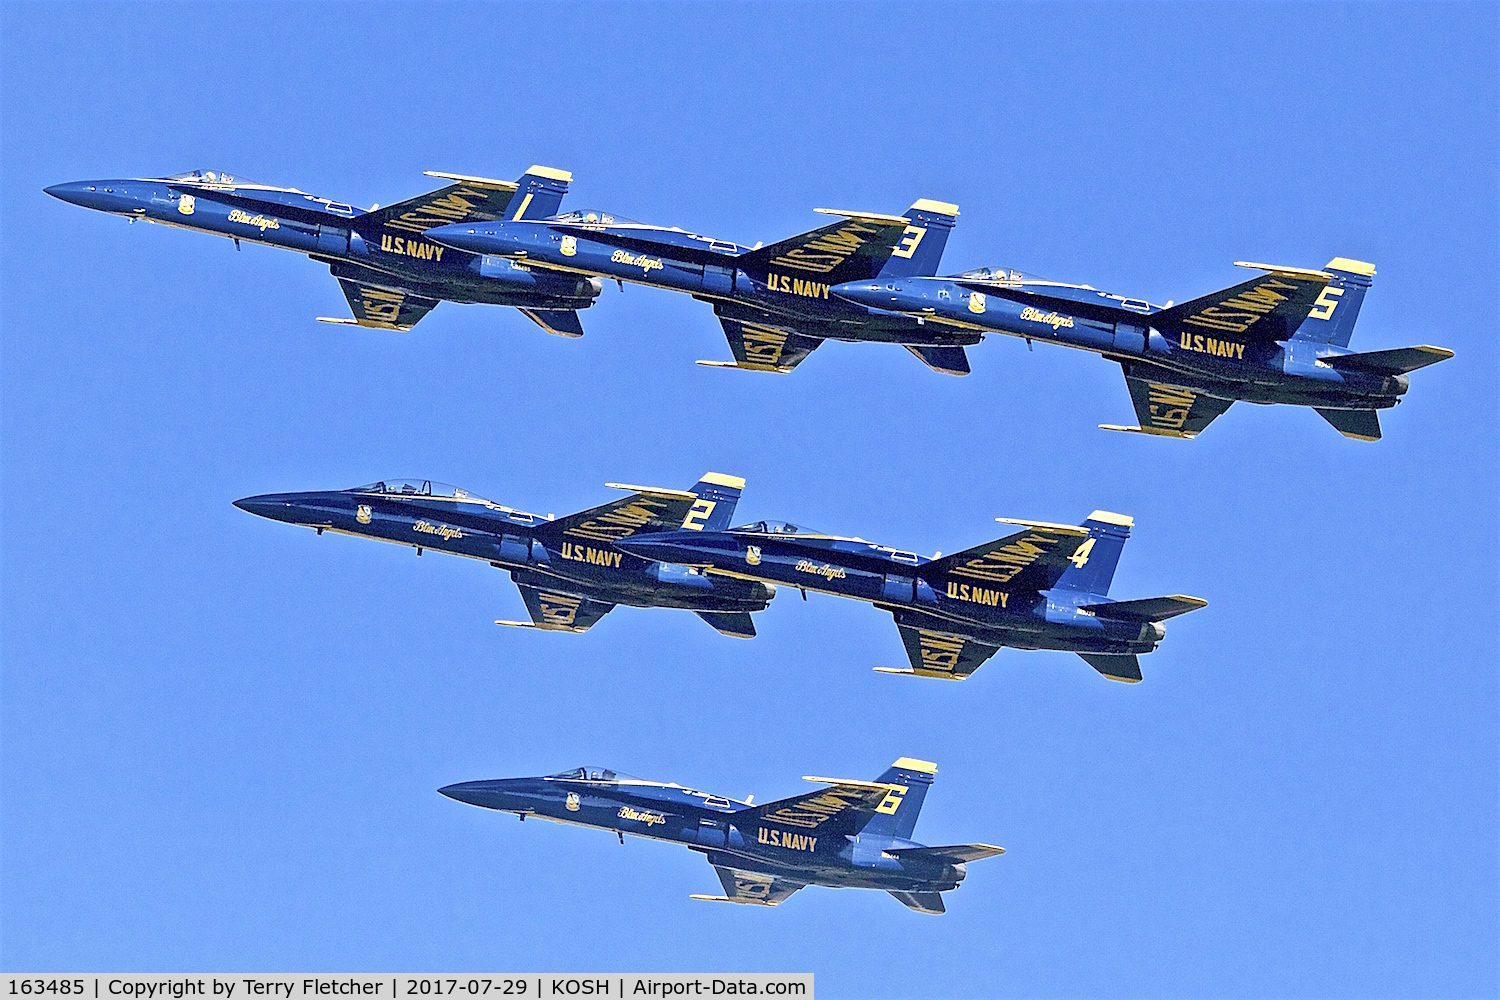 163485, 1988 McDonnell Douglas F/A-18C Hornet C/N 0717/C044, The Blue Angels Display team at 2017 EAA AirVenture at Oshkosh